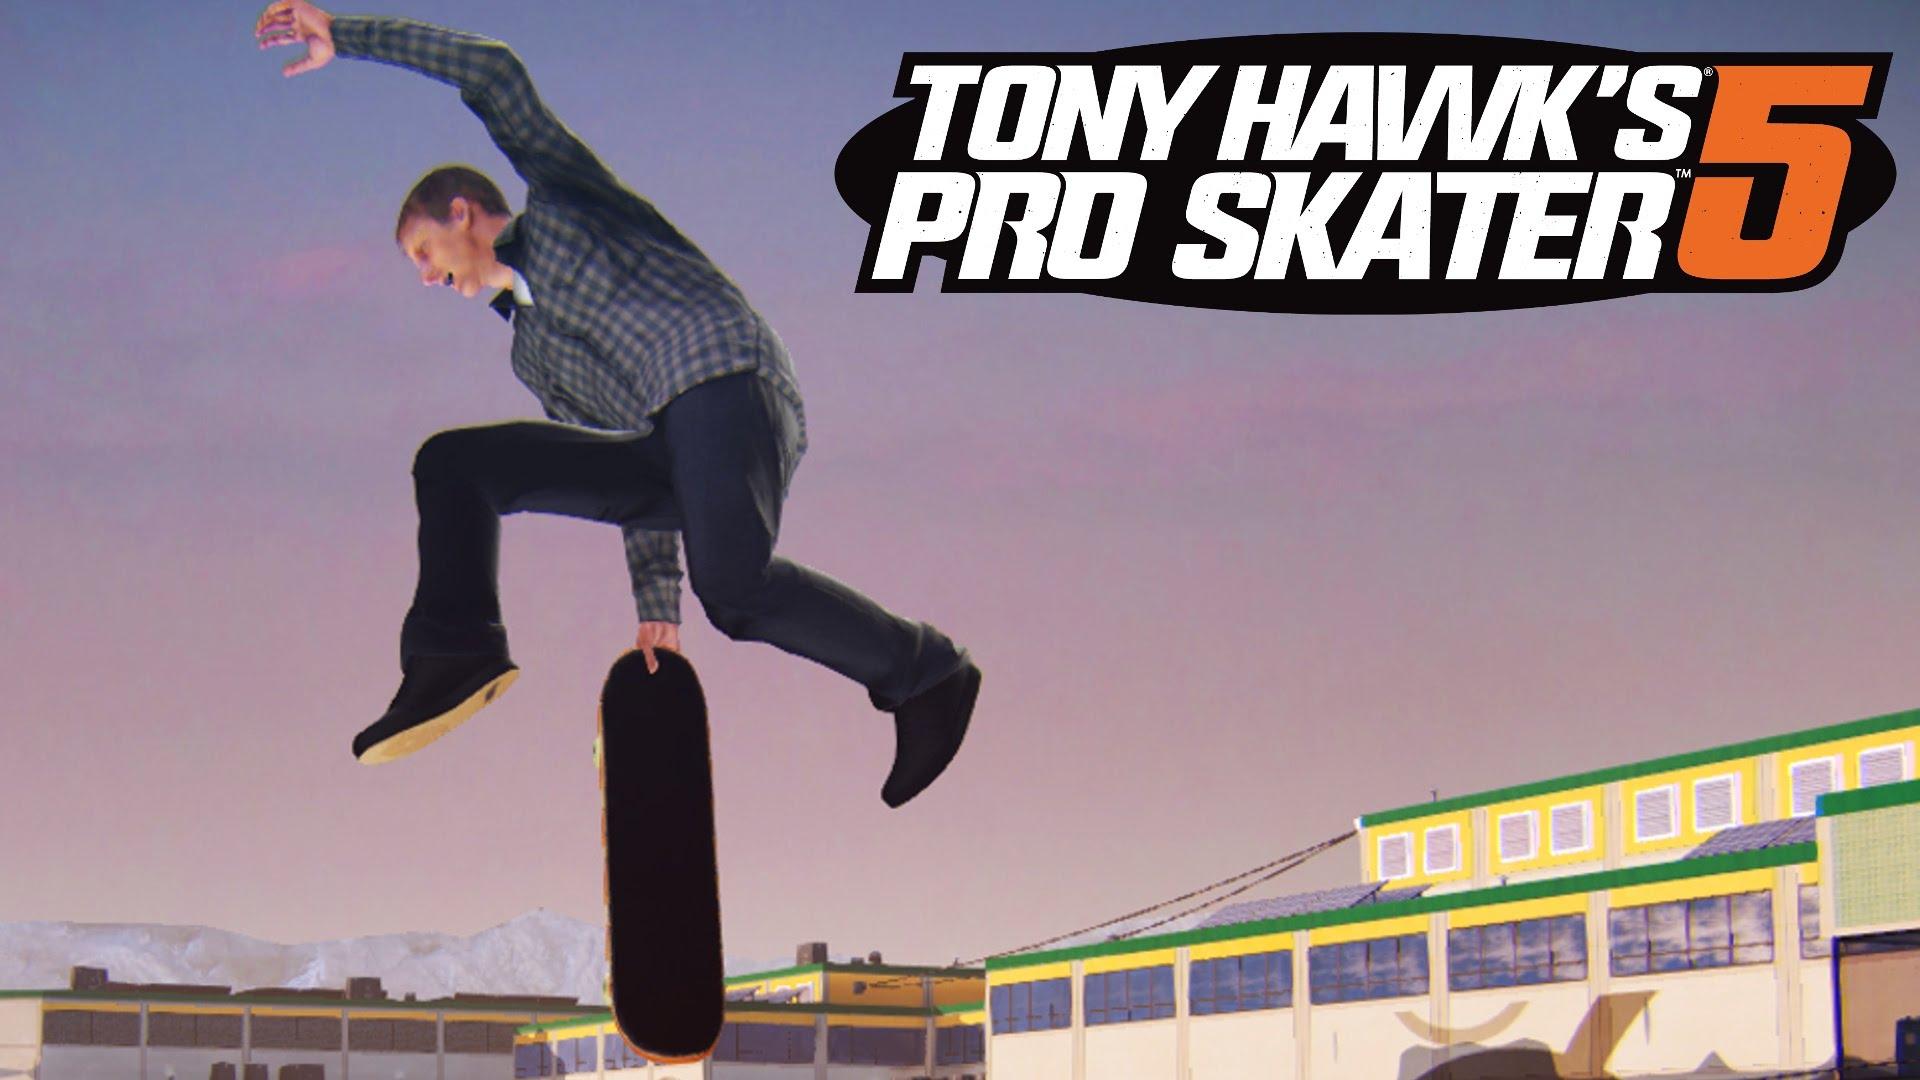 Activision will be releasing free DLC for Tony Hawk's Pro Skater 5